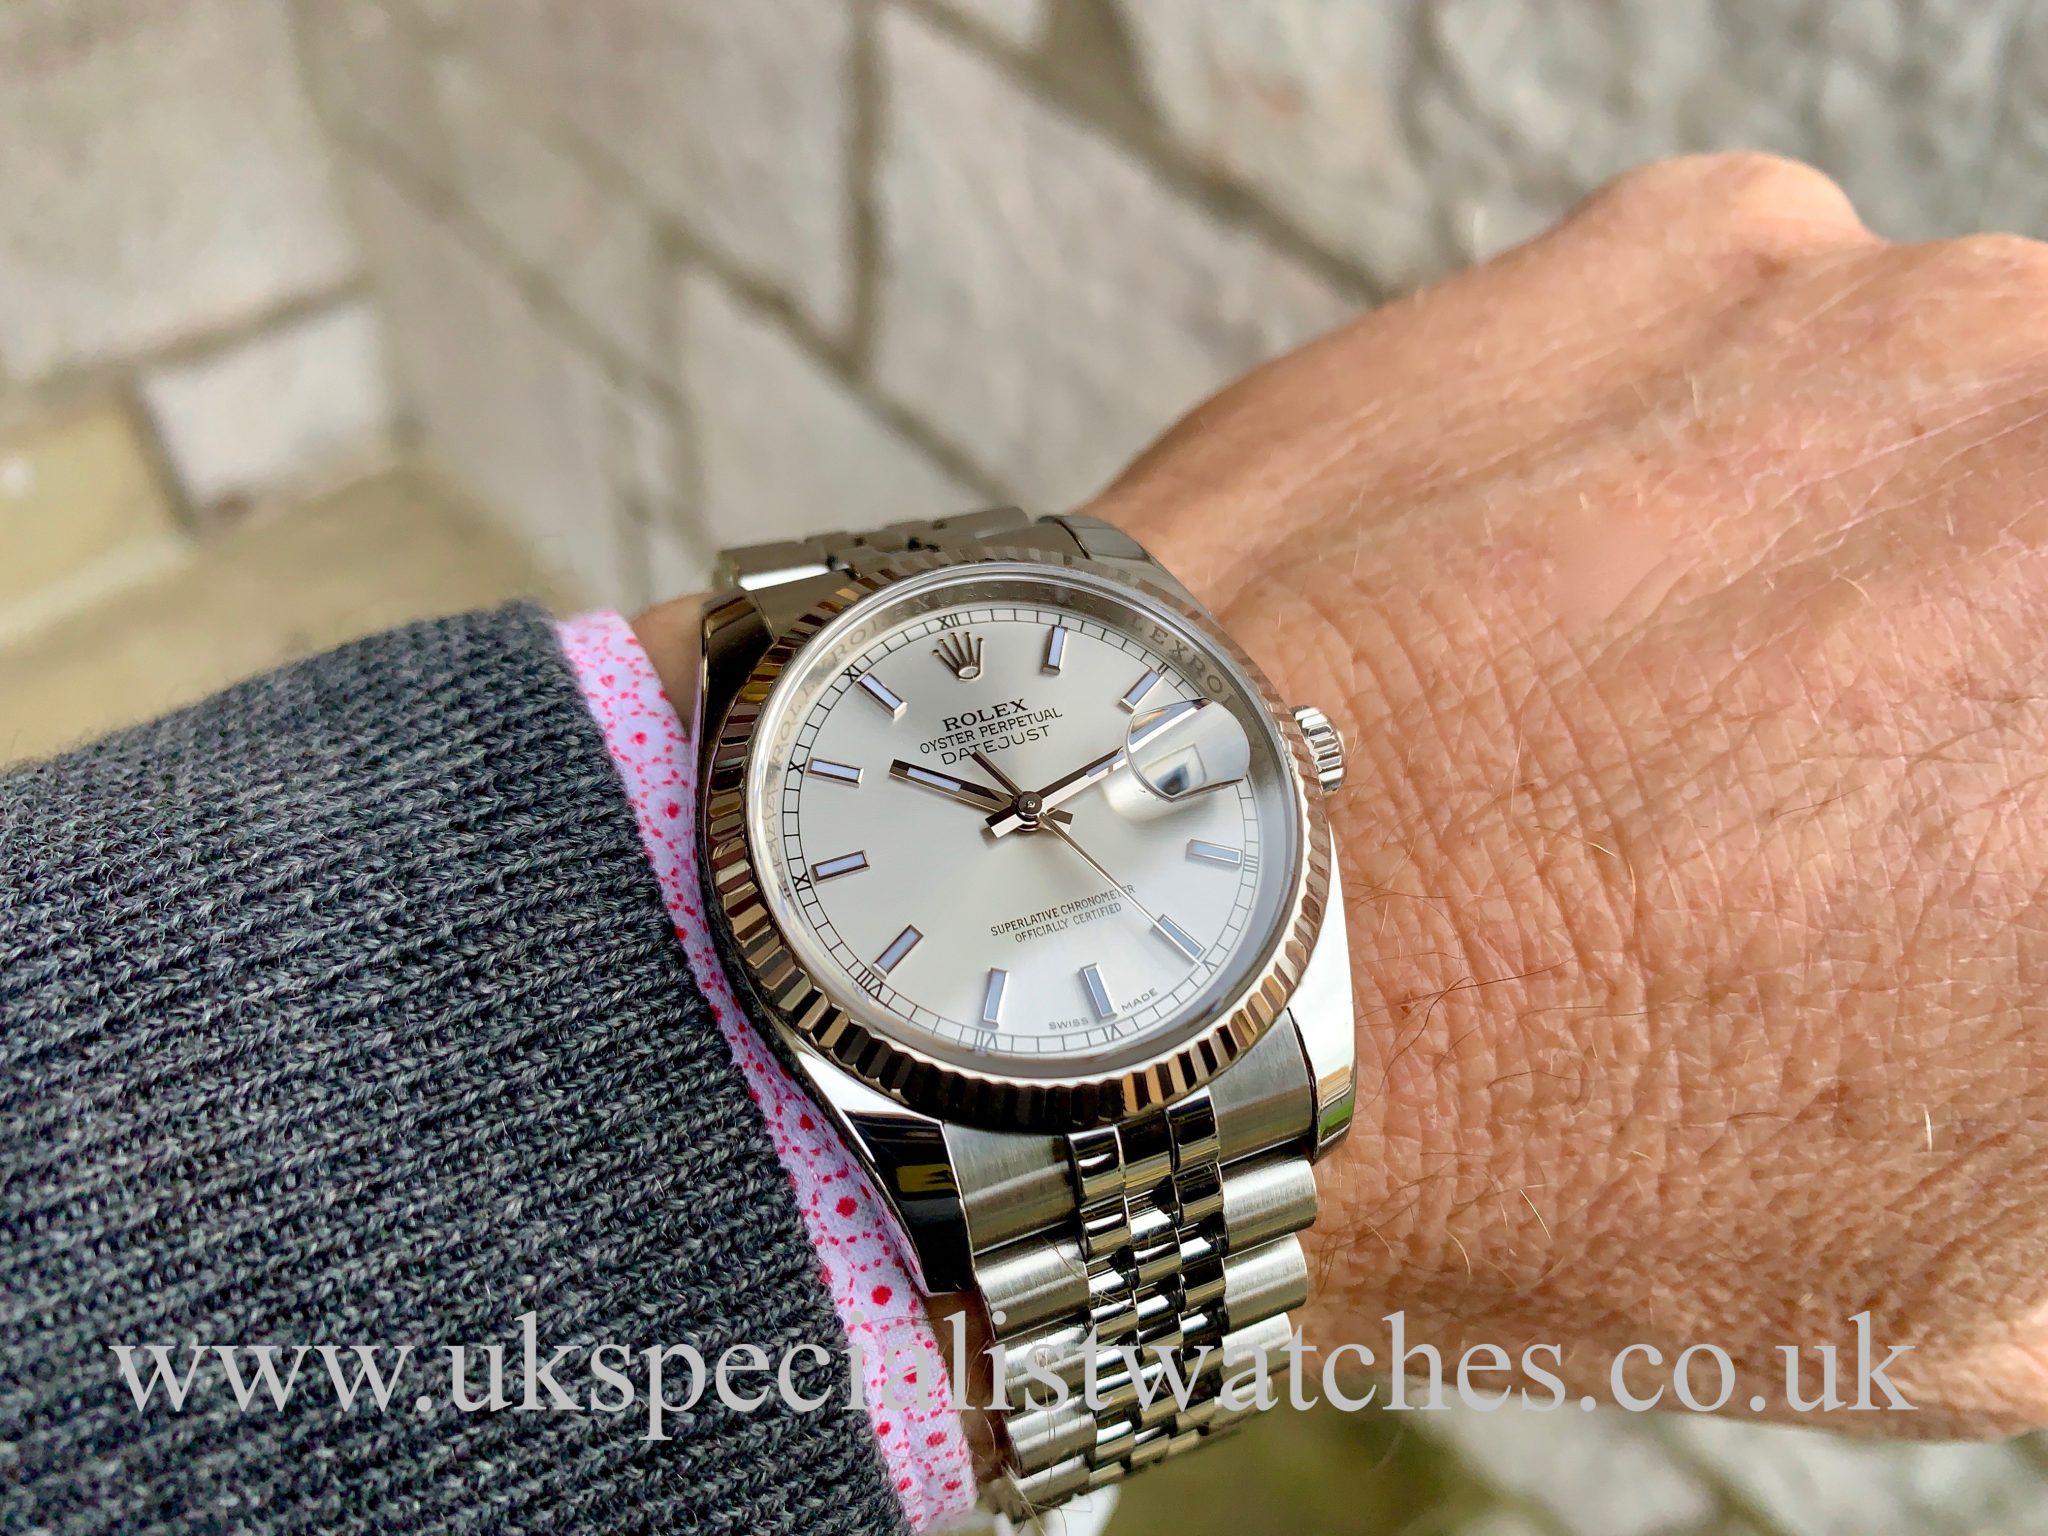 rolex datejust silver dial